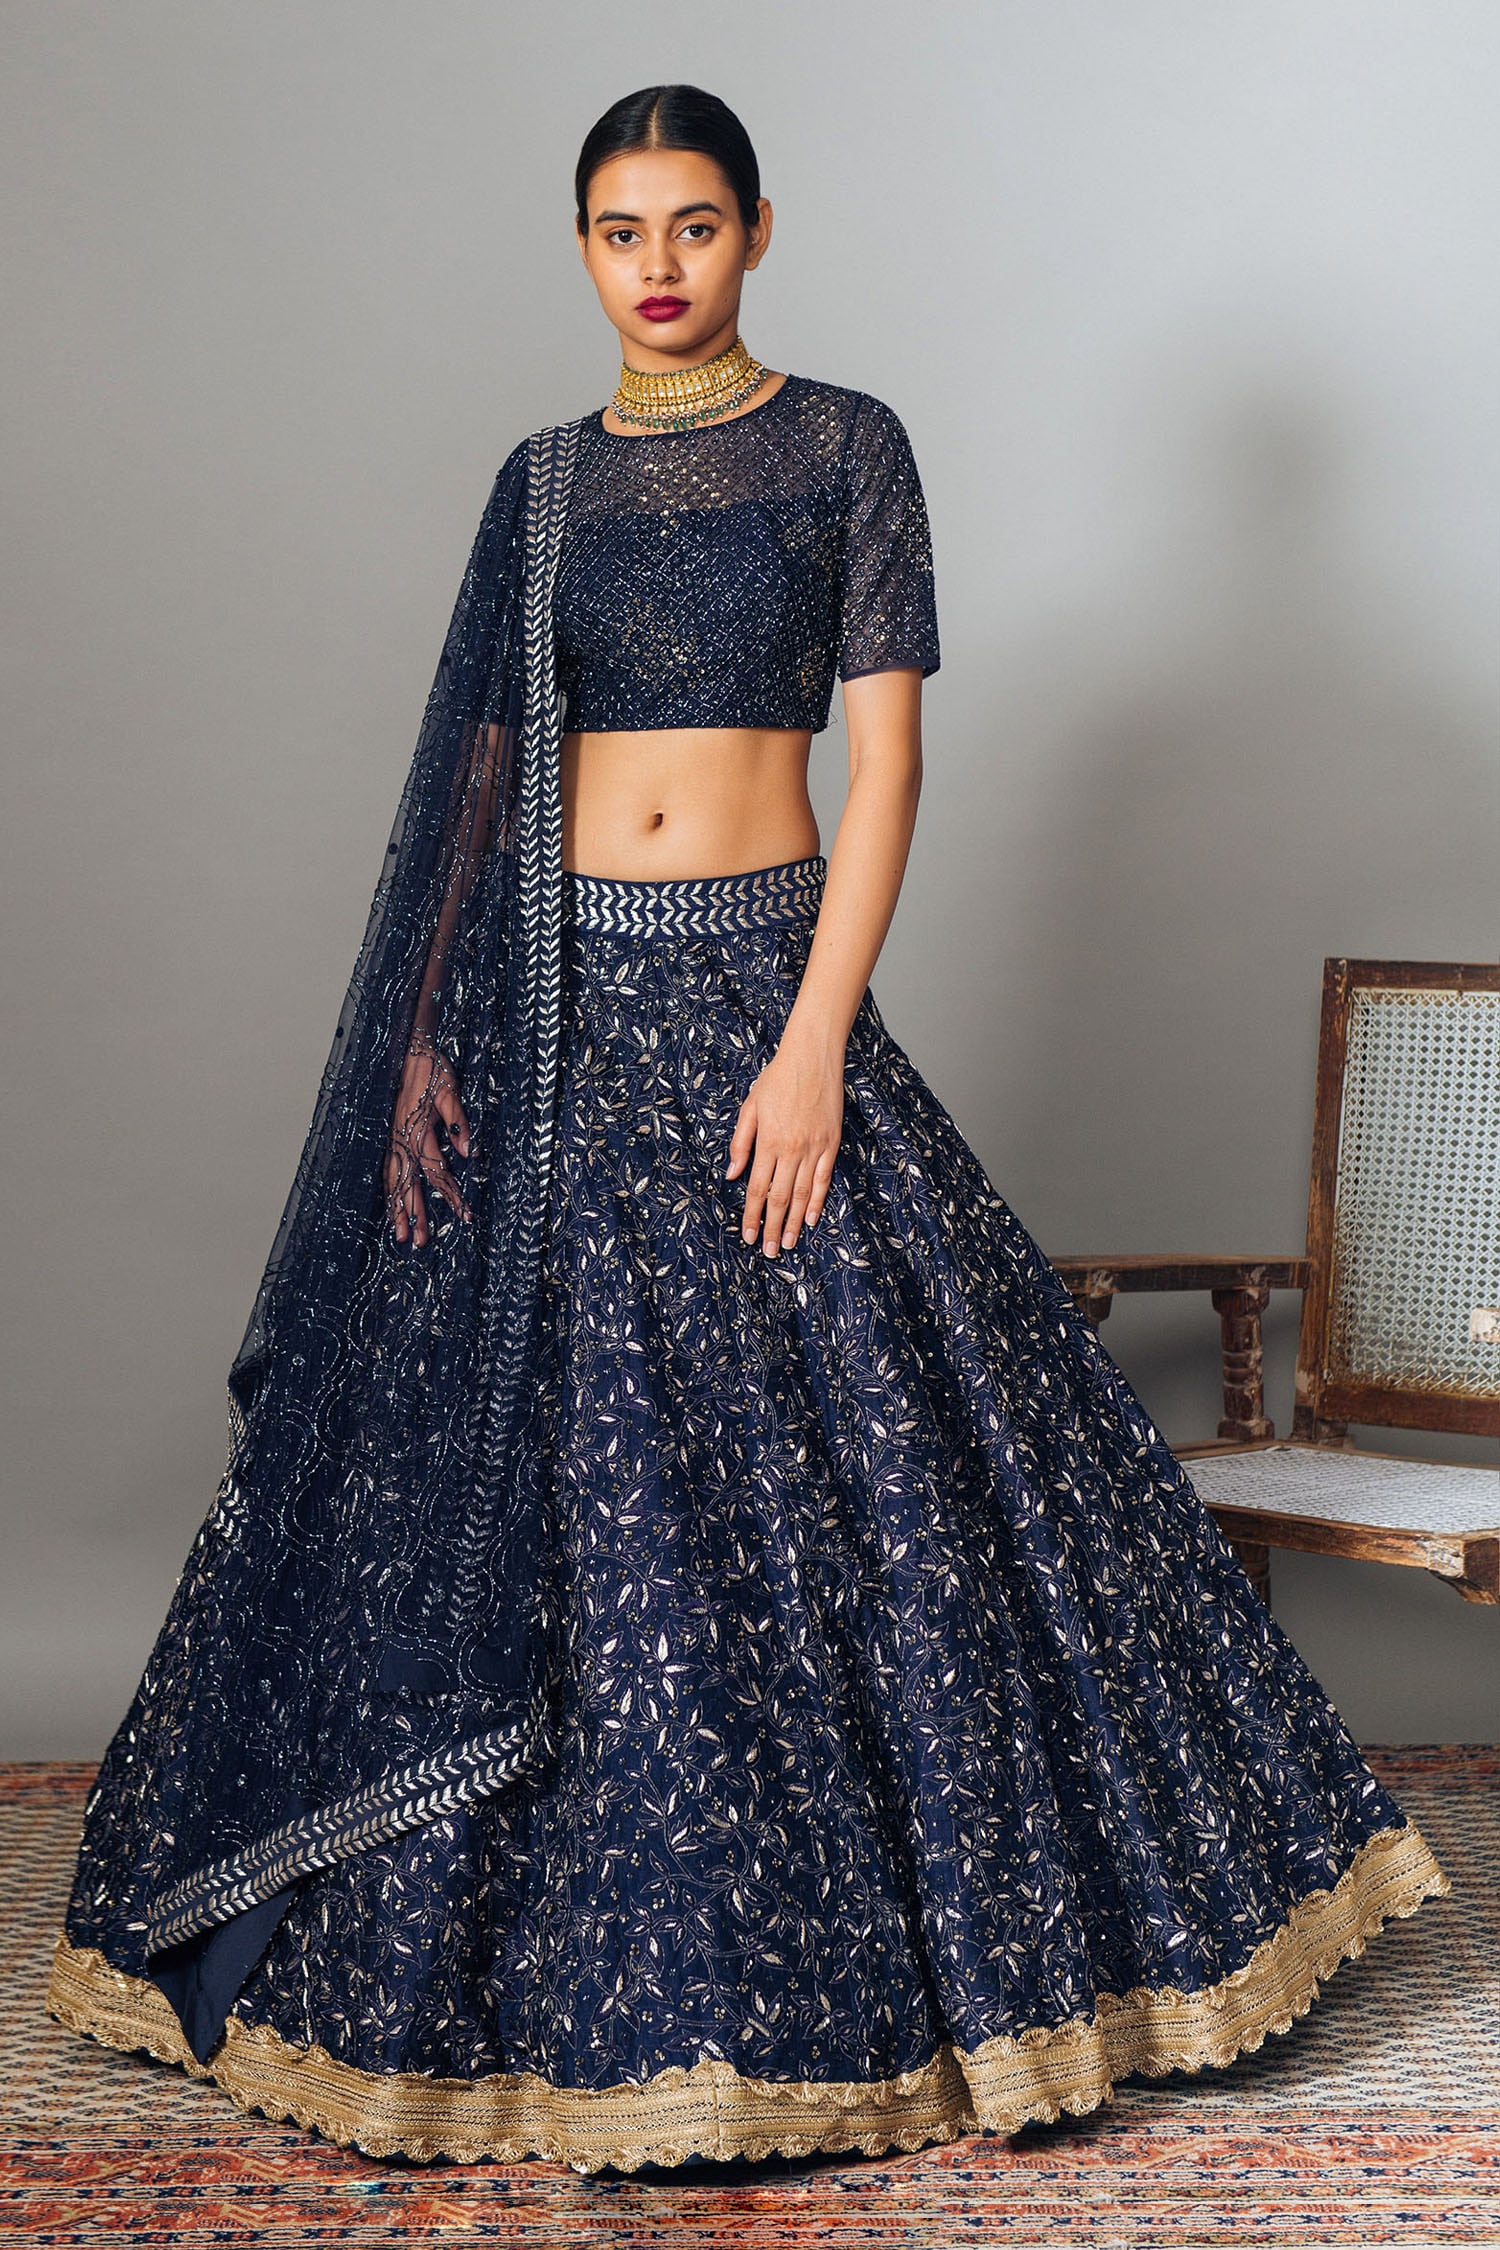 Dark Red Floral Embroidered Lehenga Set Design by Mishru at Pernia's Pop Up  Shop 2024